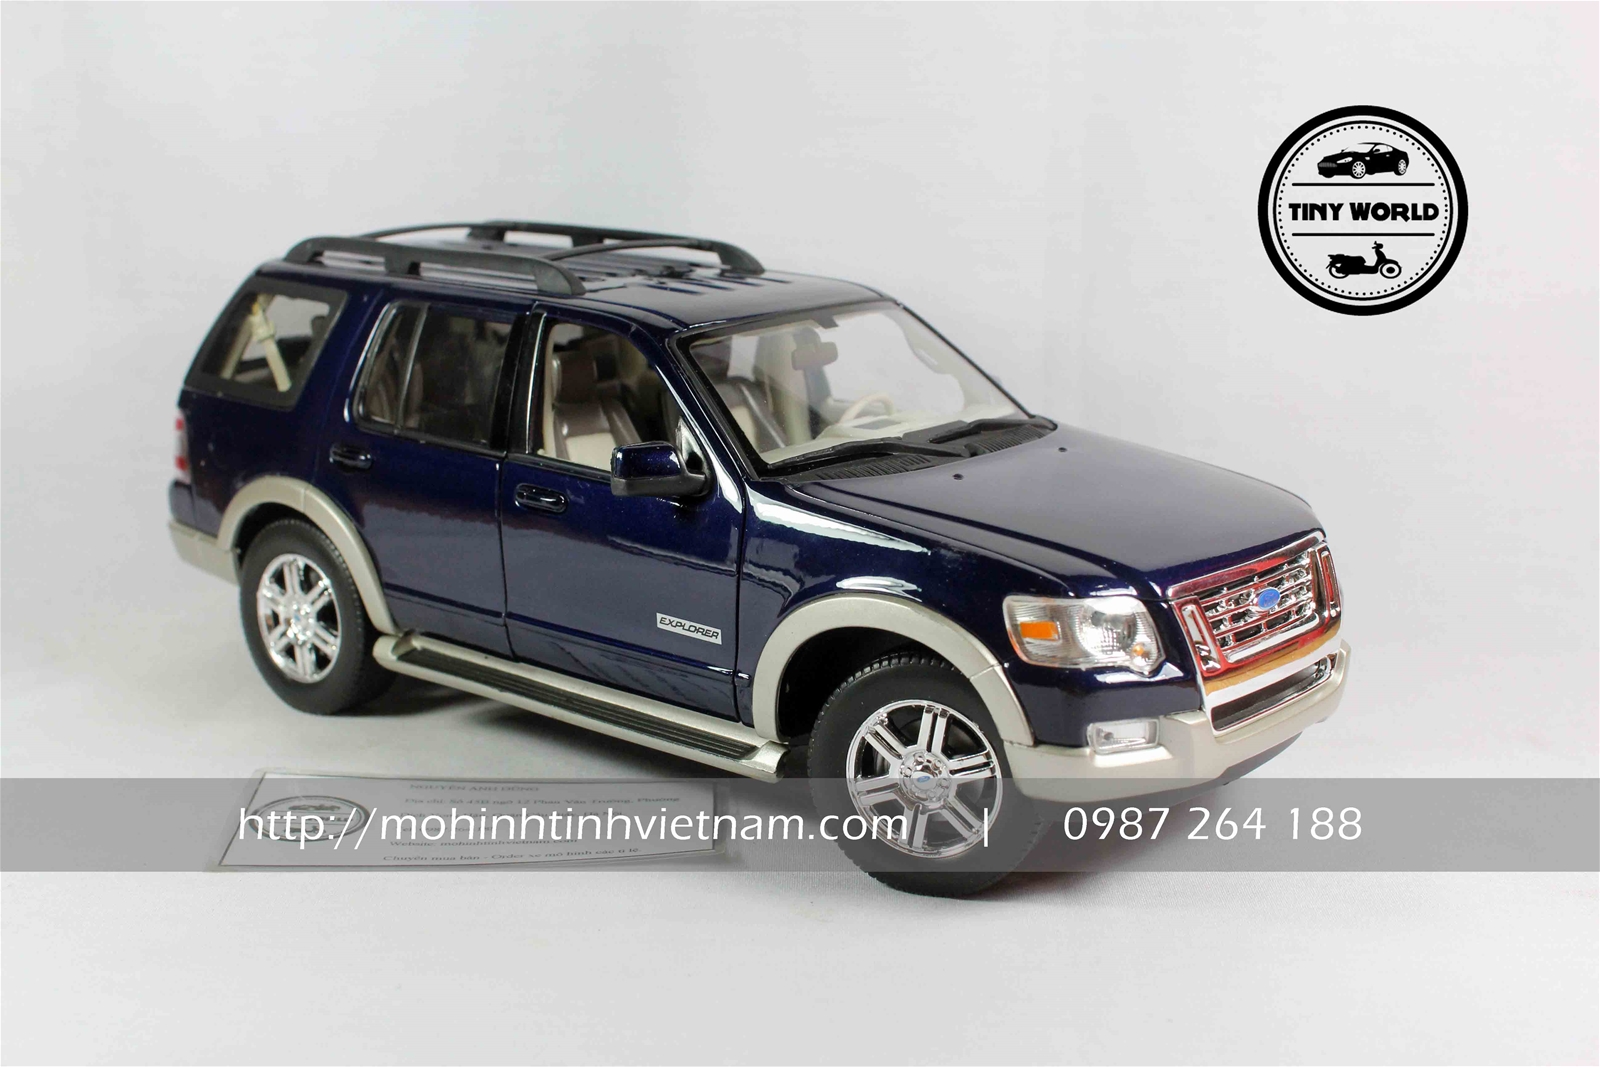 FORD EXPLORER 2006 (XANH) 1:18 WELLY